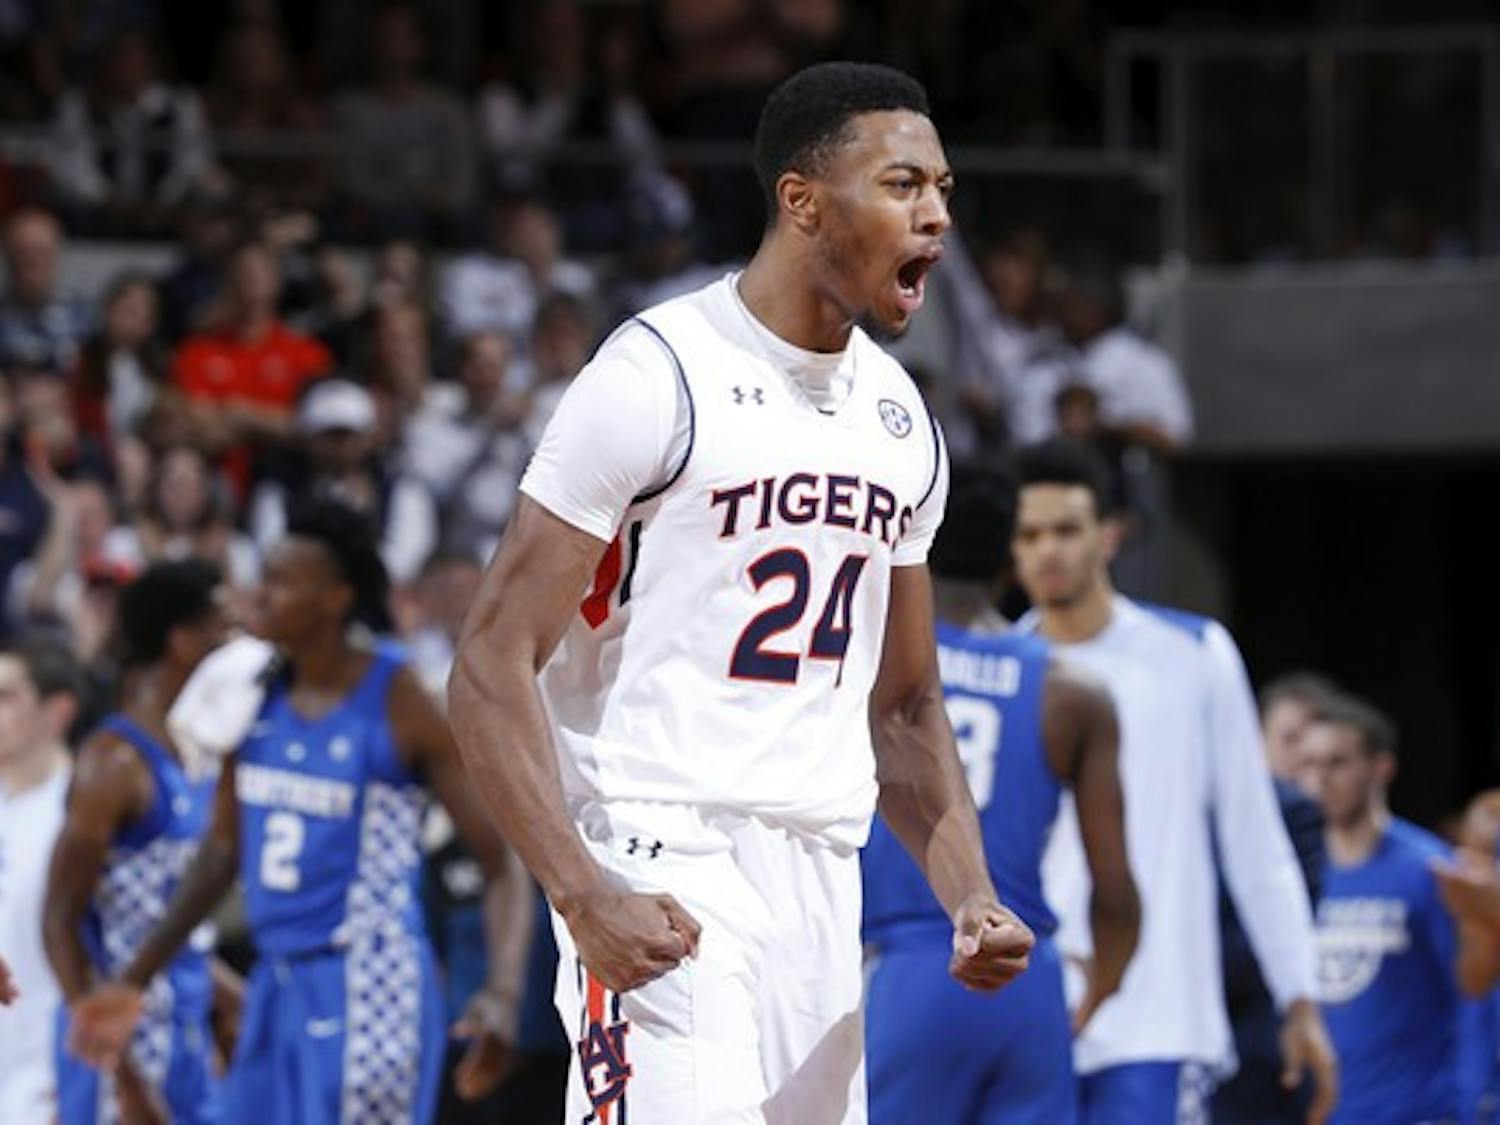 Anfernee McLemore #24 of the Auburn Tigers reacts against the Kentucky Wildcats in the first half of a game at Auburn Arena on February 14, 2018 in Auburn, Alabama.